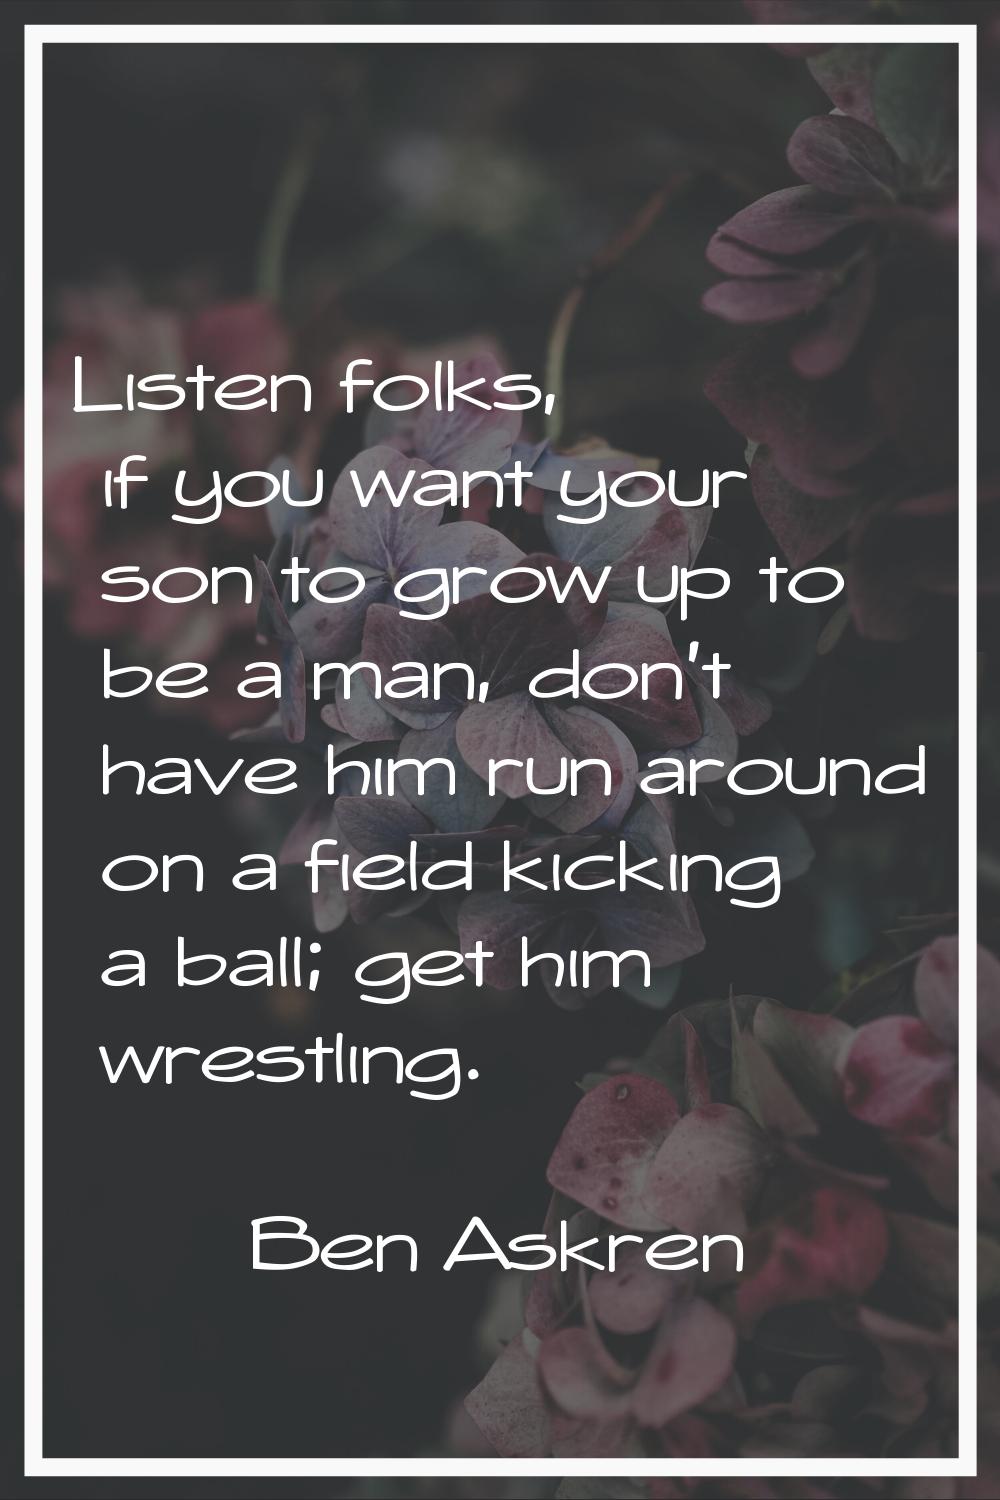 Listen folks, if you want your son to grow up to be a man, don't have him run around on a field kic